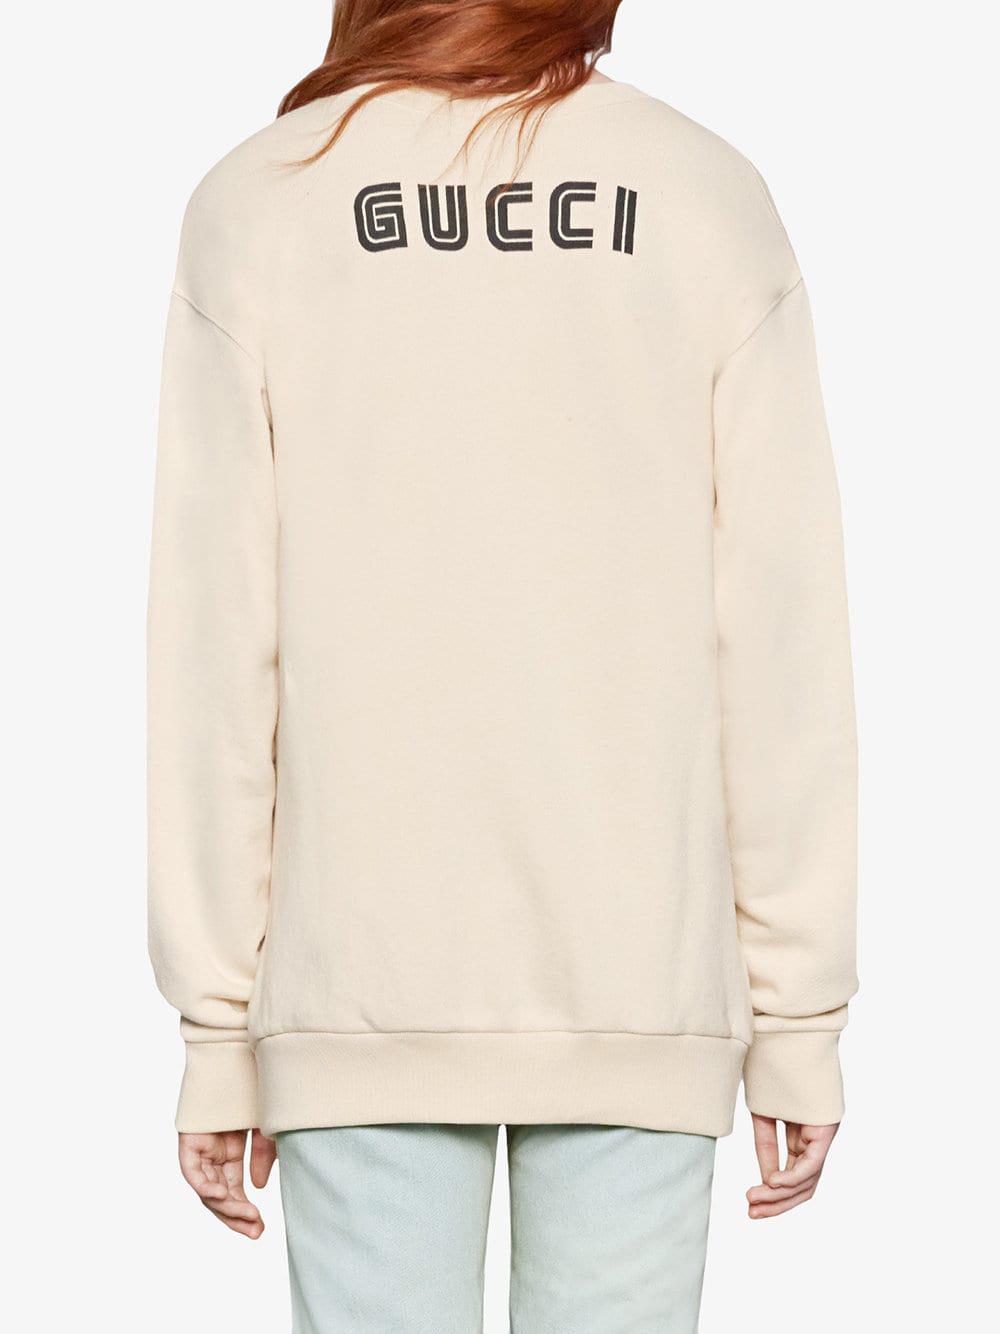 Gucci Cotton Oversize Sweatshirt With Sequin Snow White - Lyst